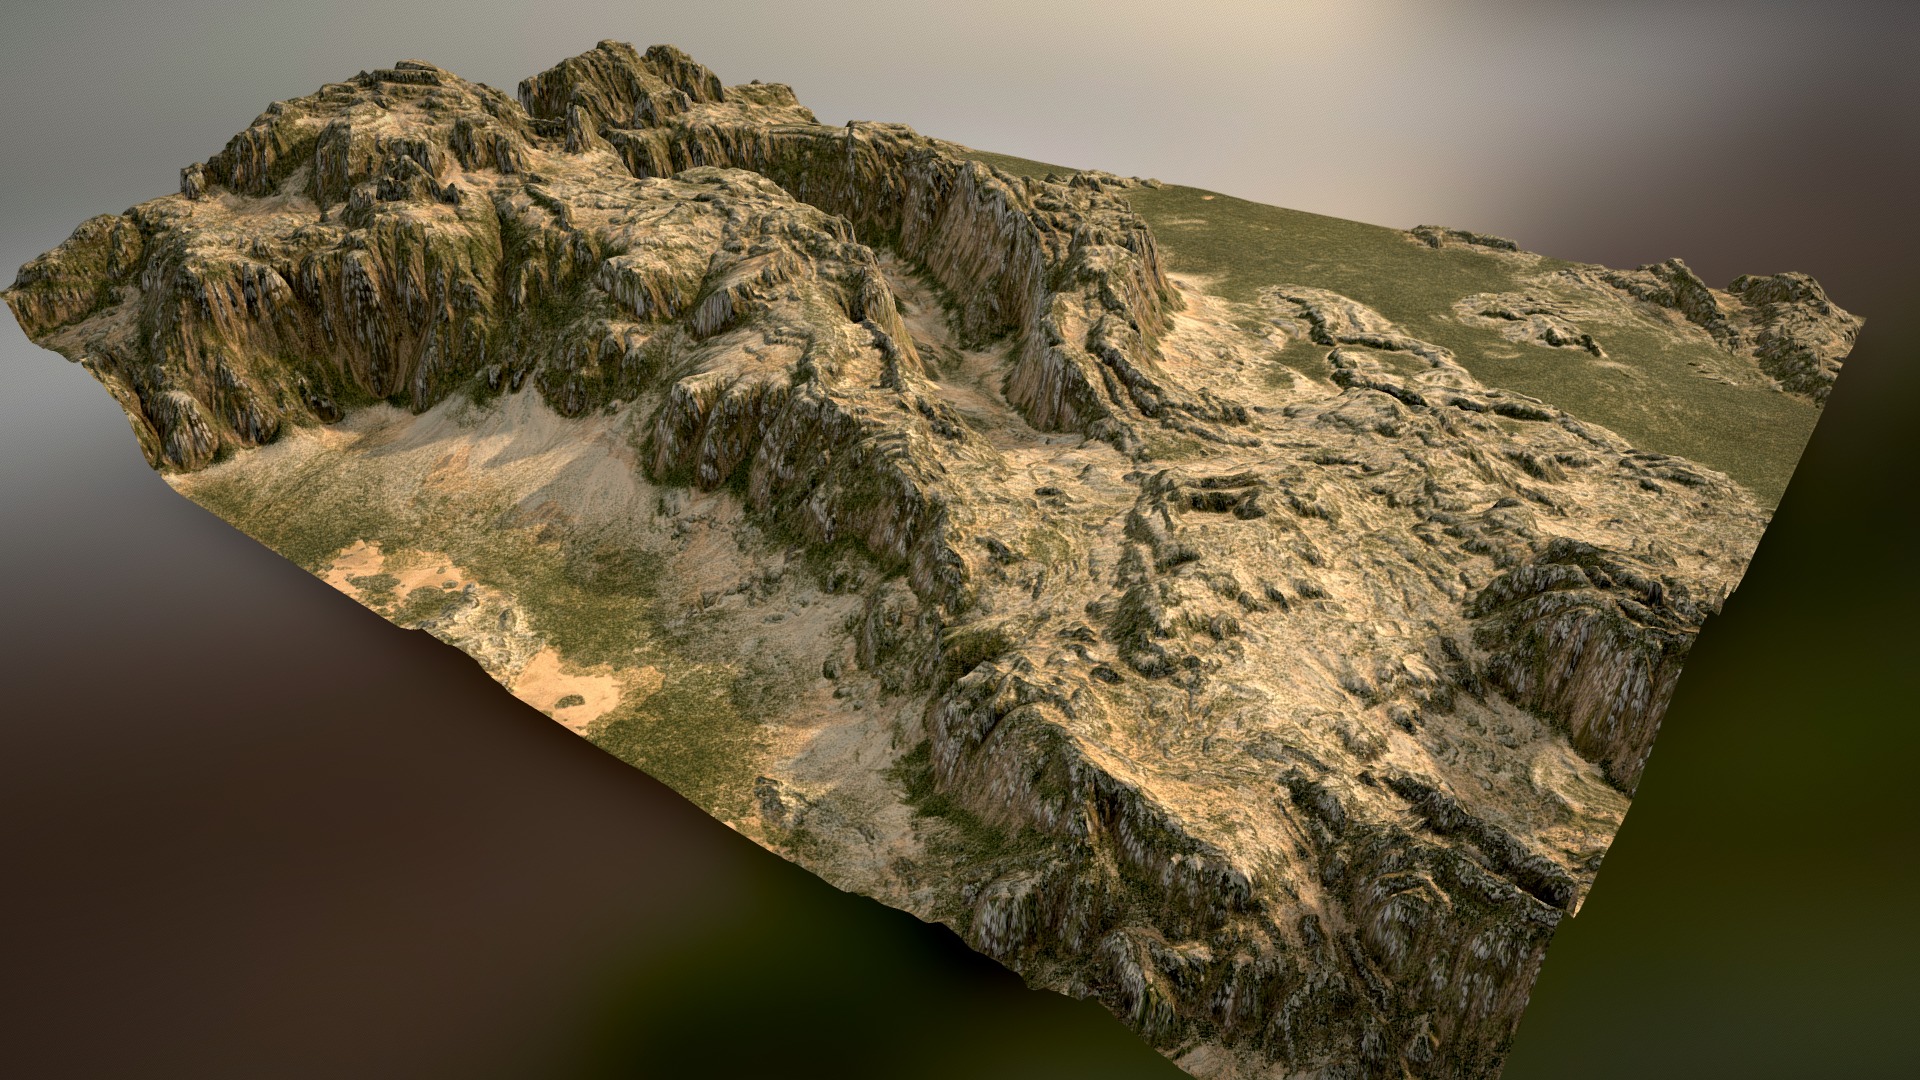 3D model Winding Chasm Badlands – Dry - This is a 3D model of the Winding Chasm Badlands - Dry. The 3D model is about a rocky mountain with a body of water below.